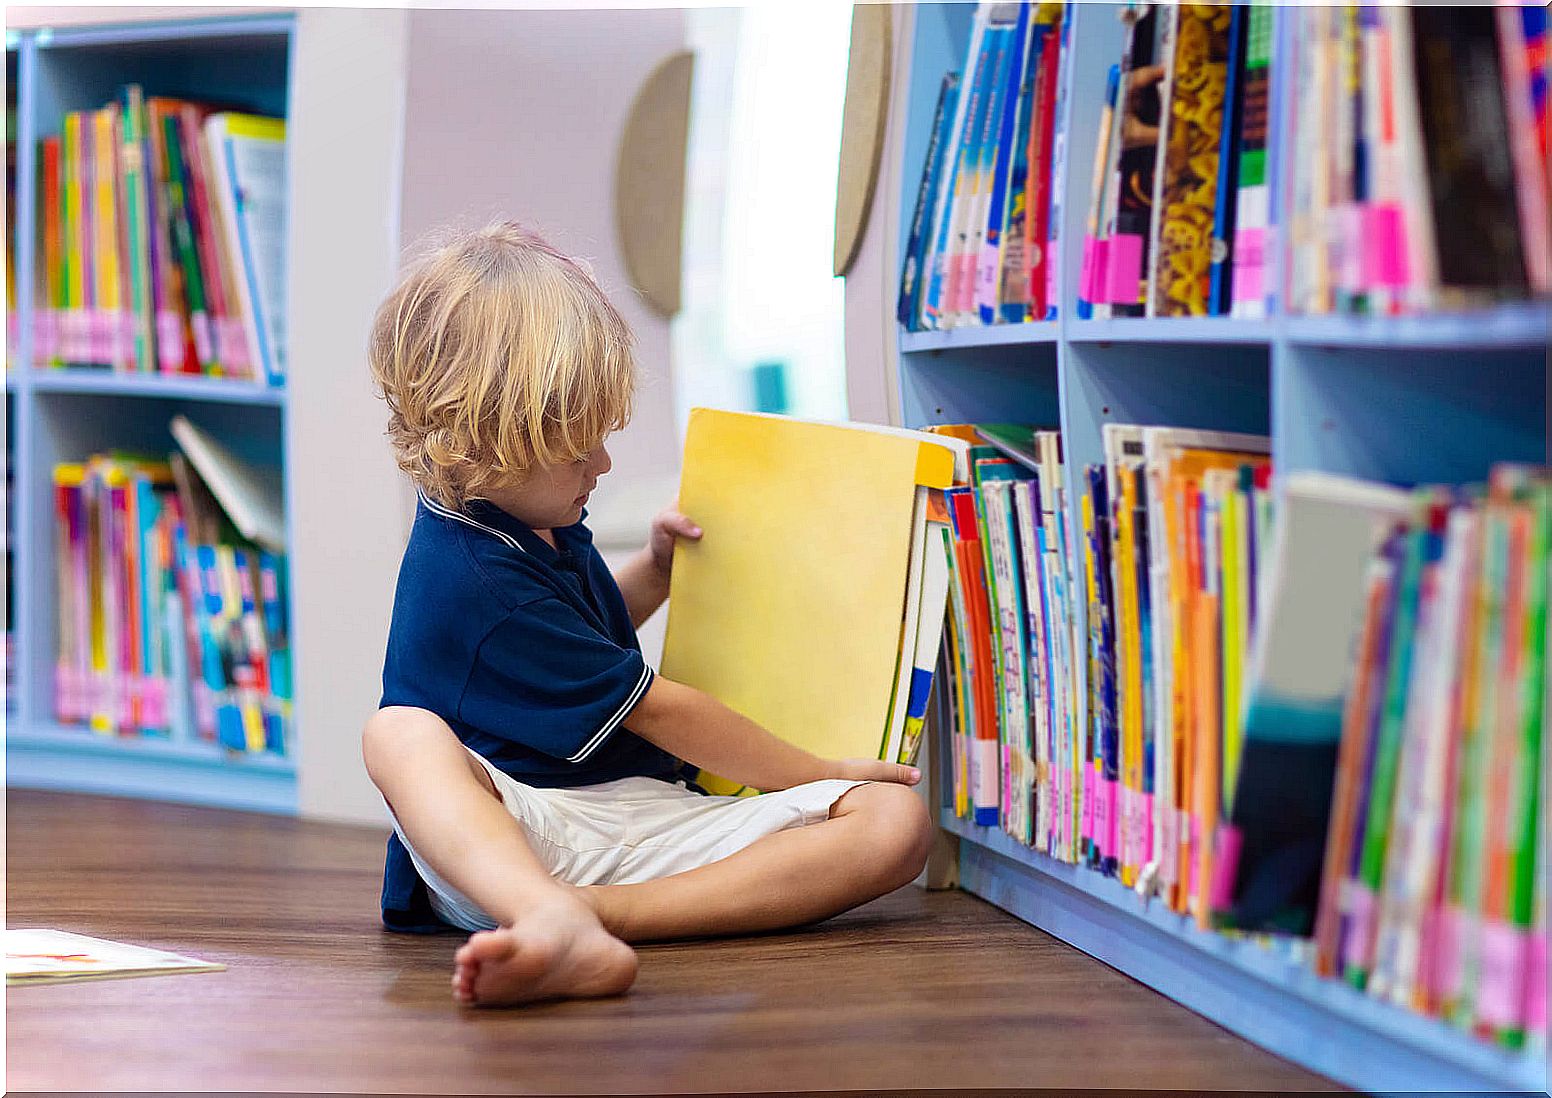 Boy picking up a book and reading in the classroom library.